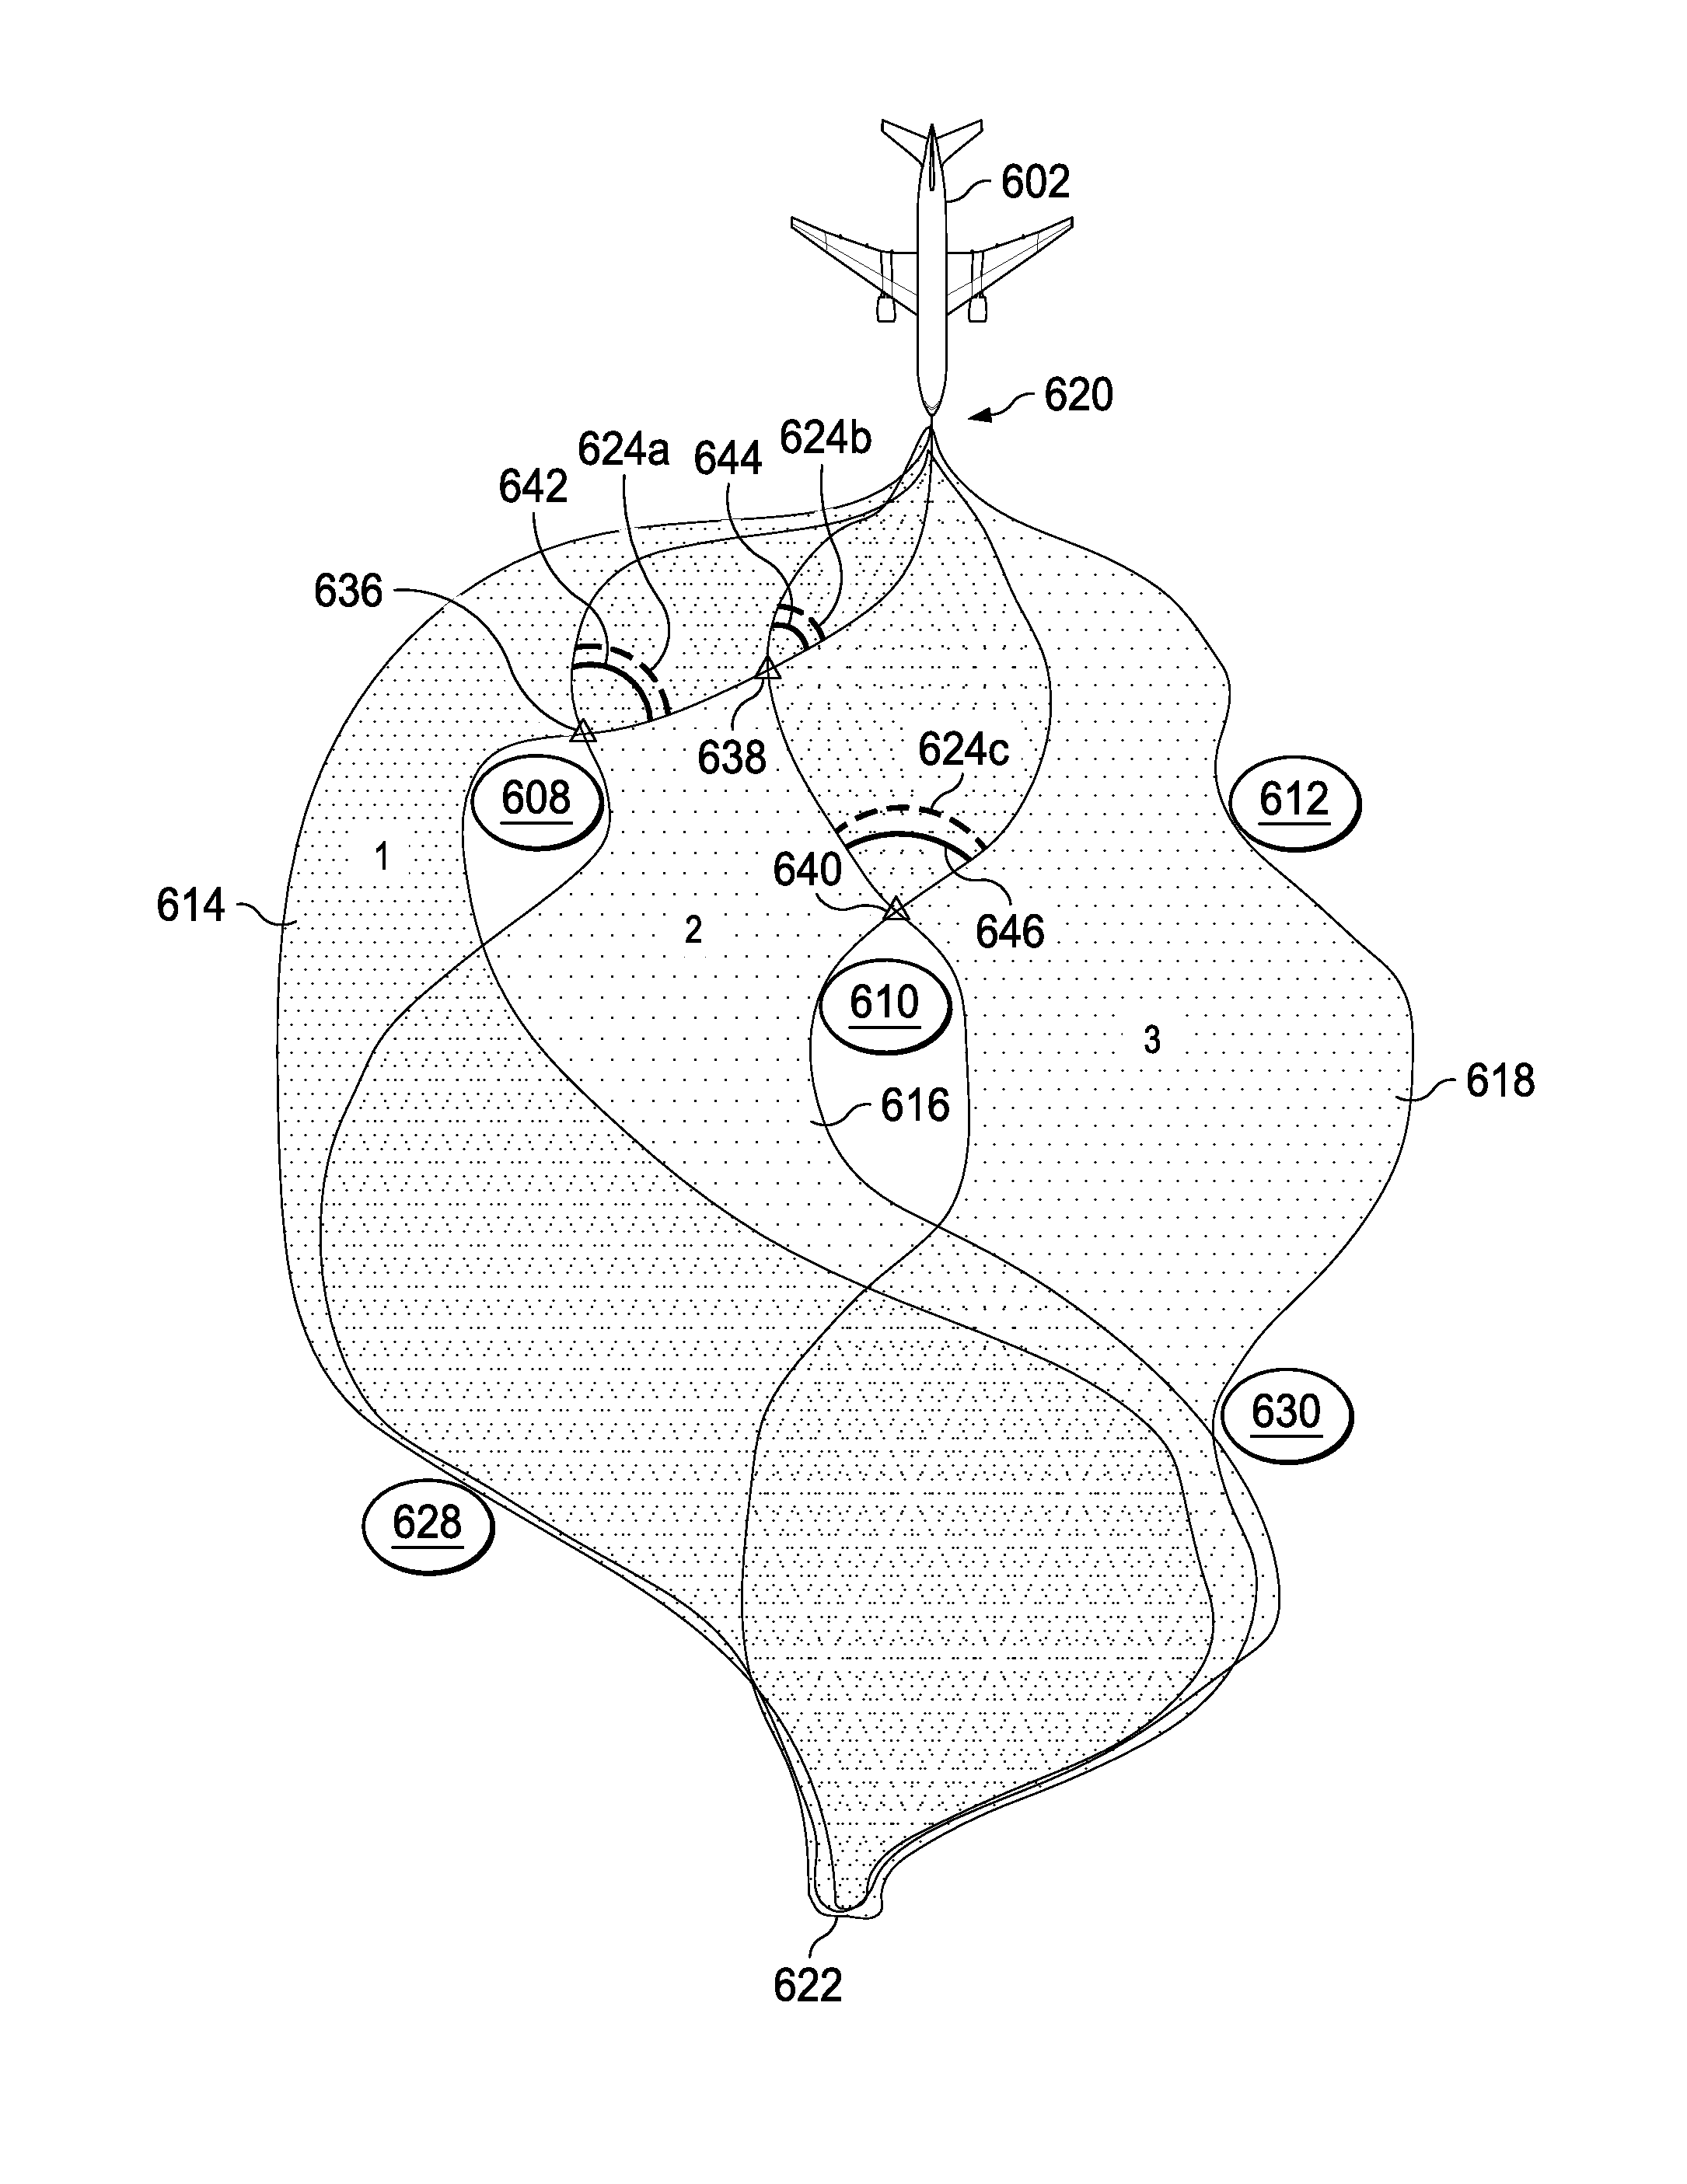 System and method for routing decisions in a separation management system